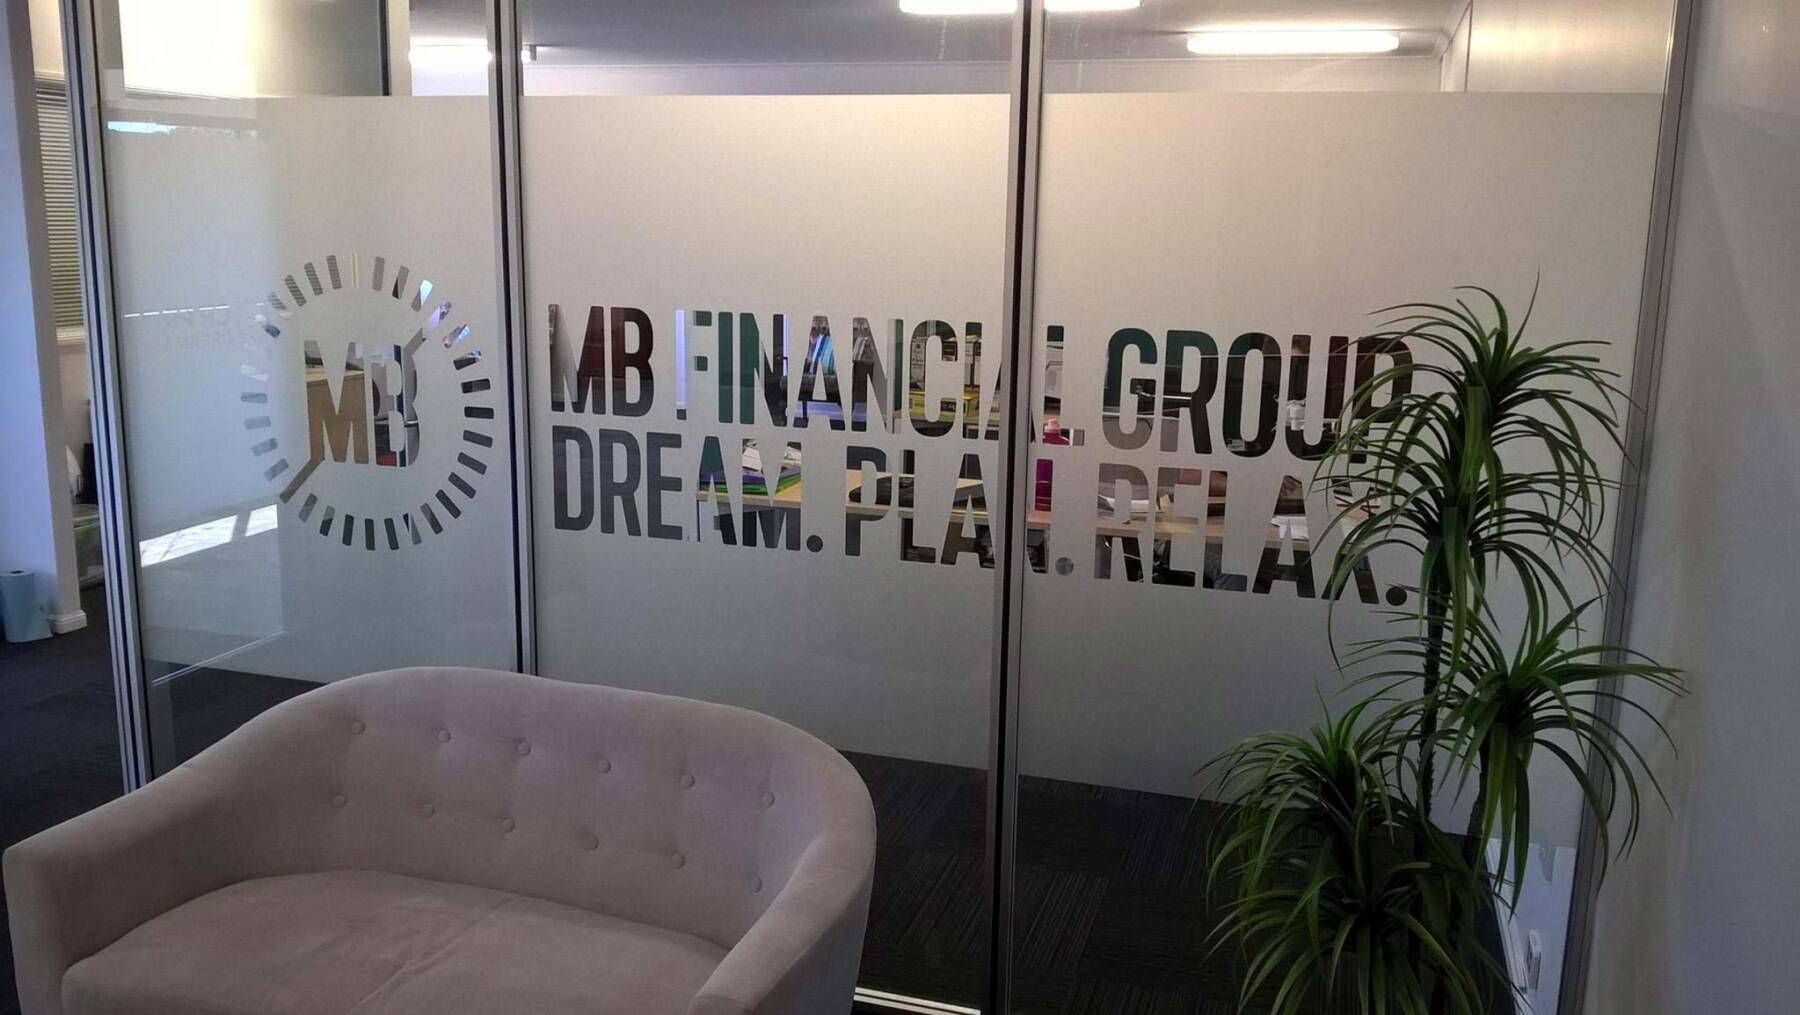 Frosted Glass Effect With Business Name